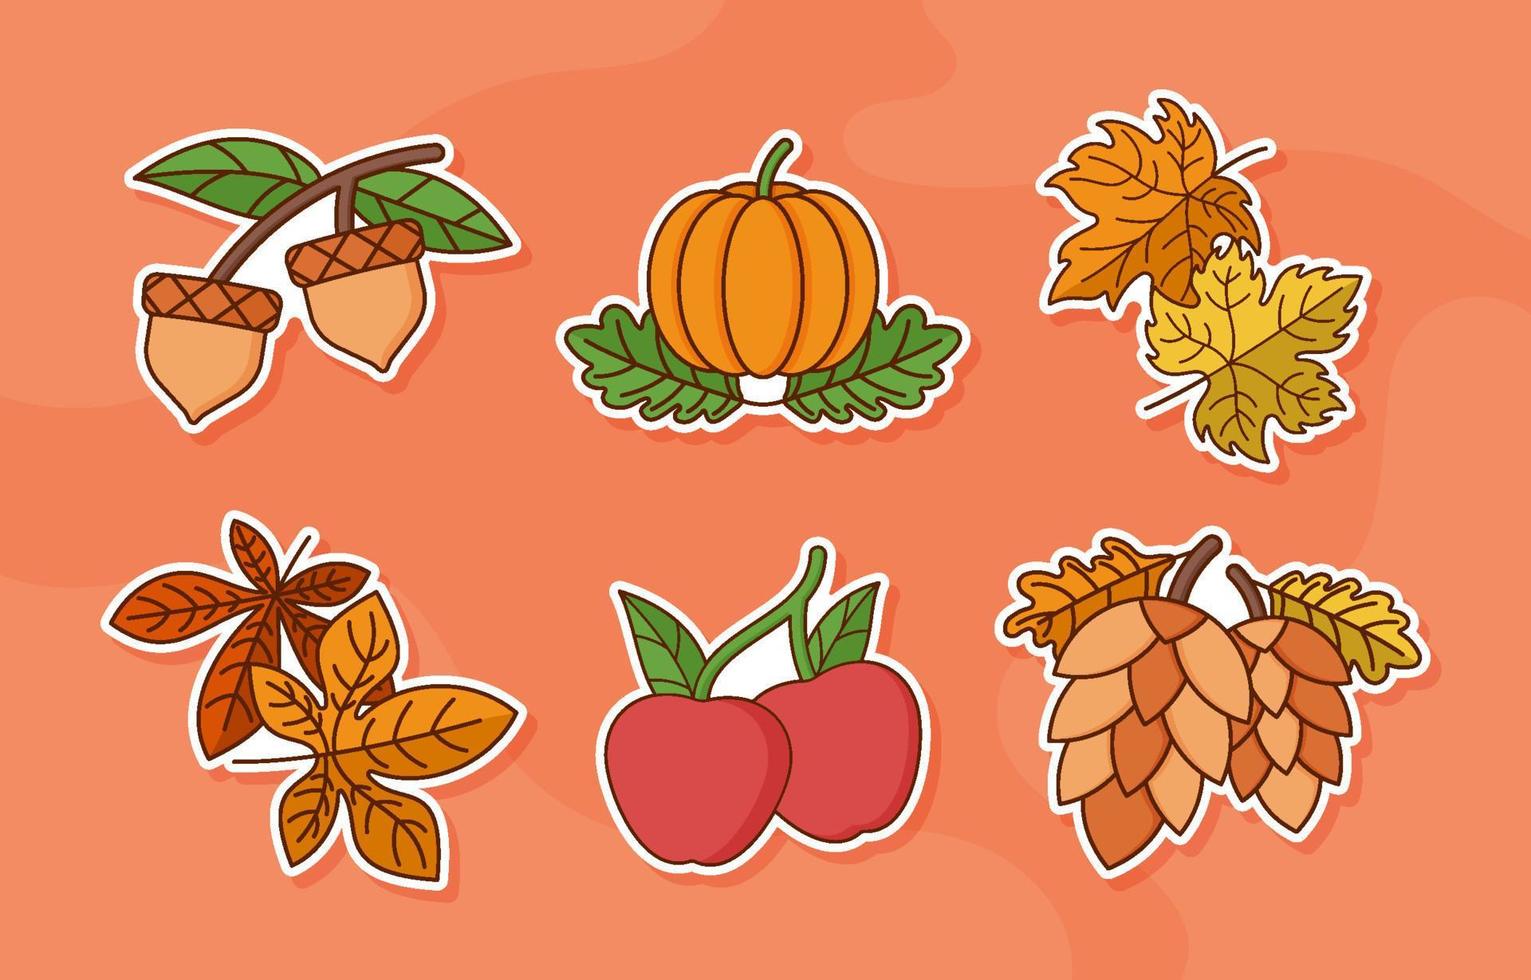 Nature Fall Floral Sticker Set vector